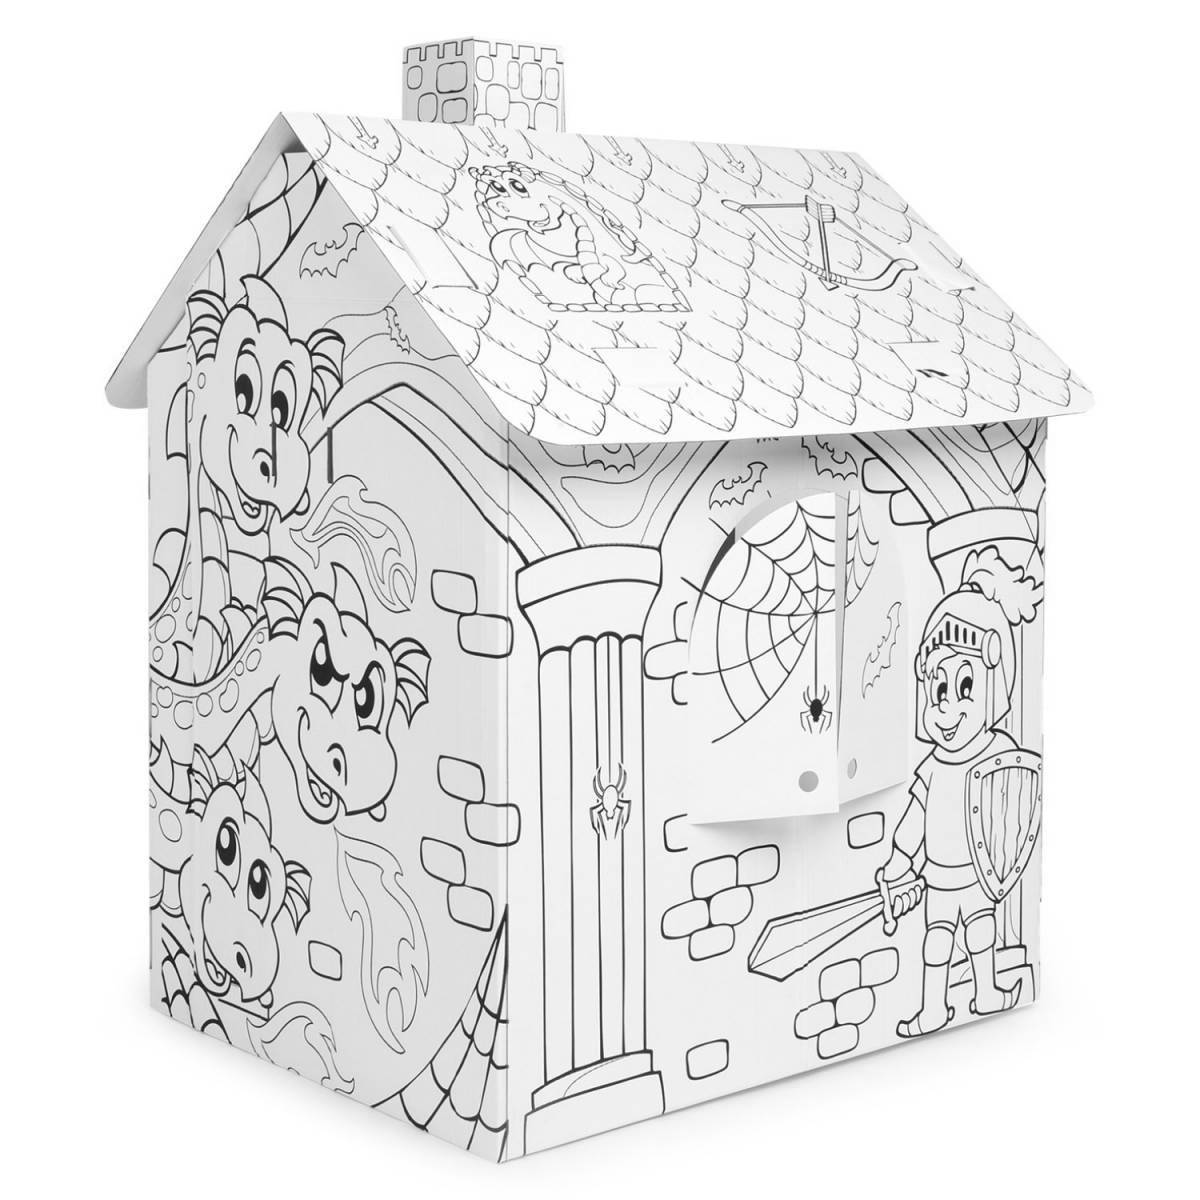 Impressive coloring book of a cardboard house for babies